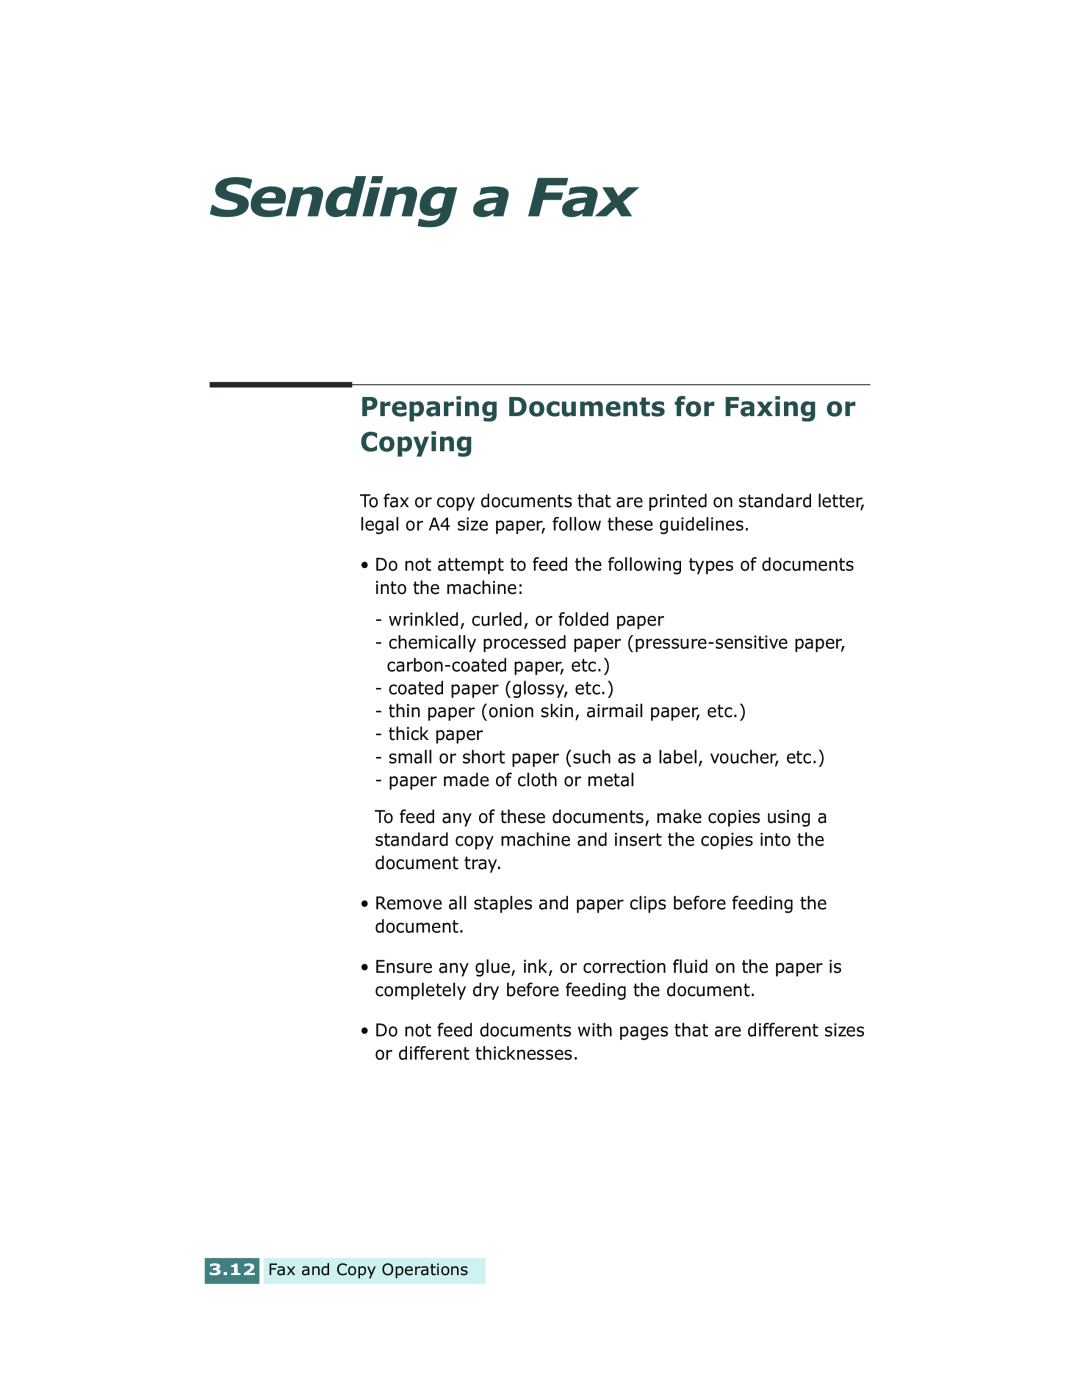 Xerox Pro 580 manual Sending a Fax, Preparing Documents for Faxing or Copying 